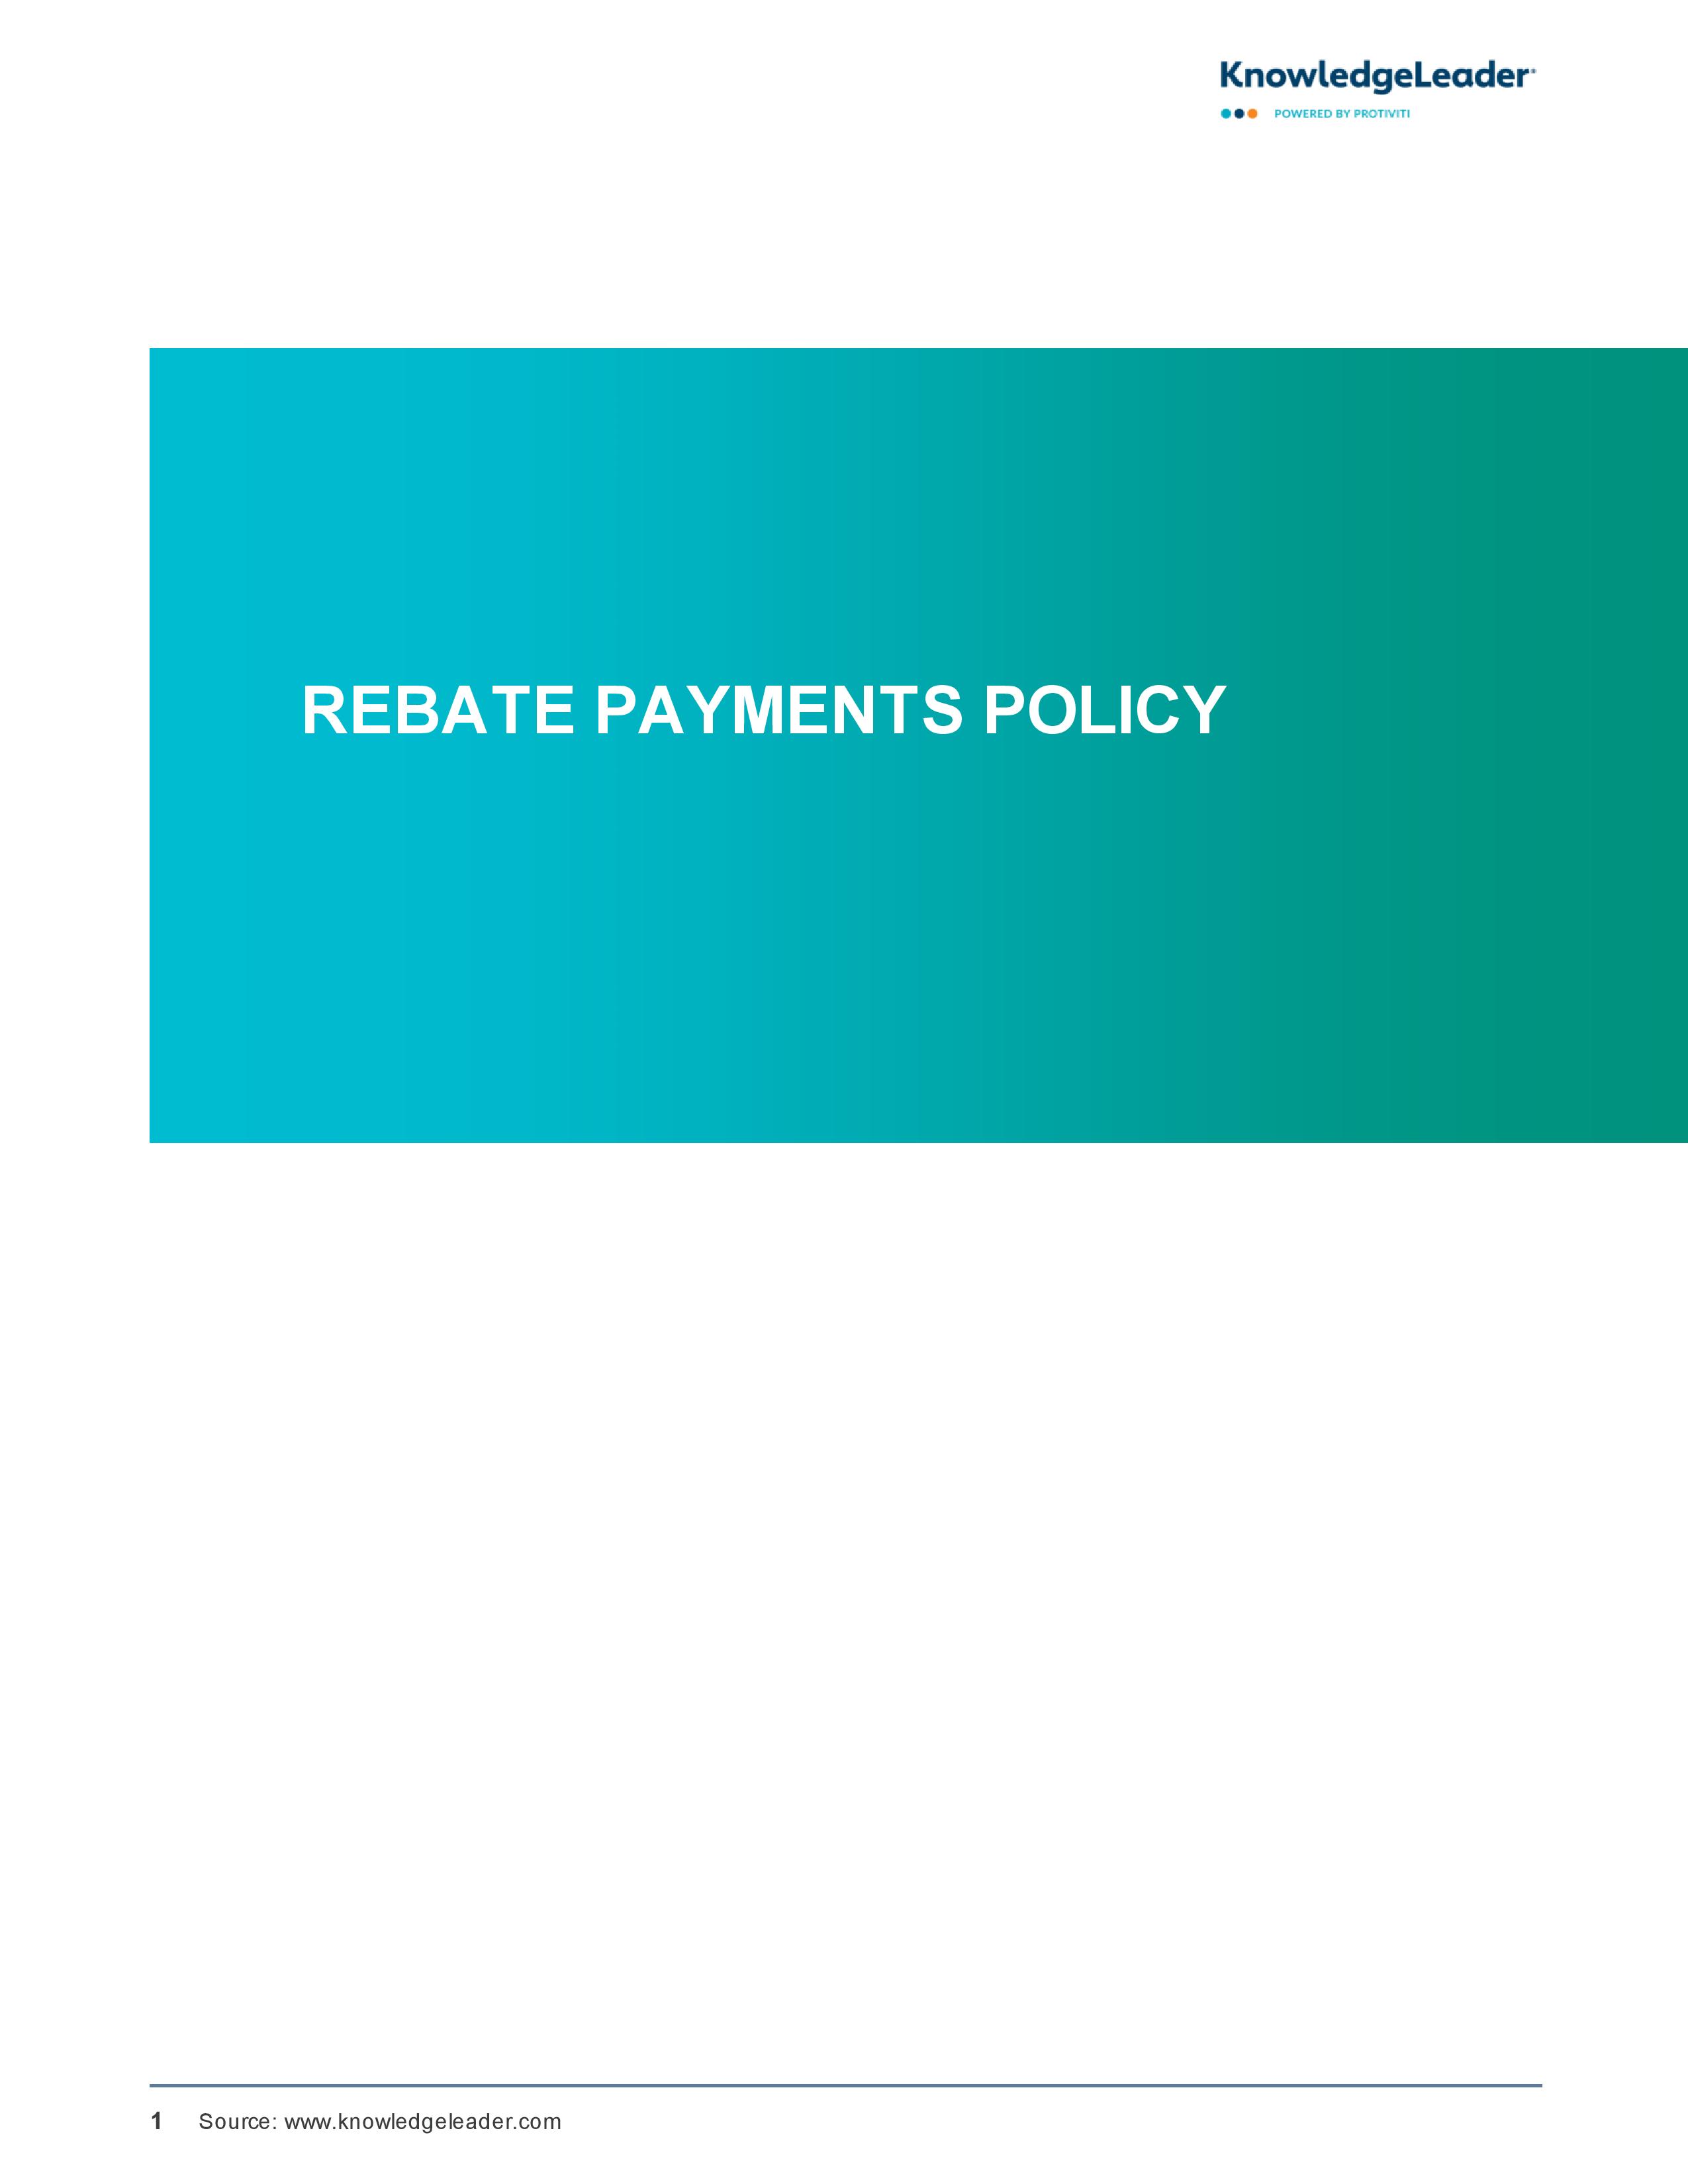 Screenshot of the first page of Rebate Payments Policy